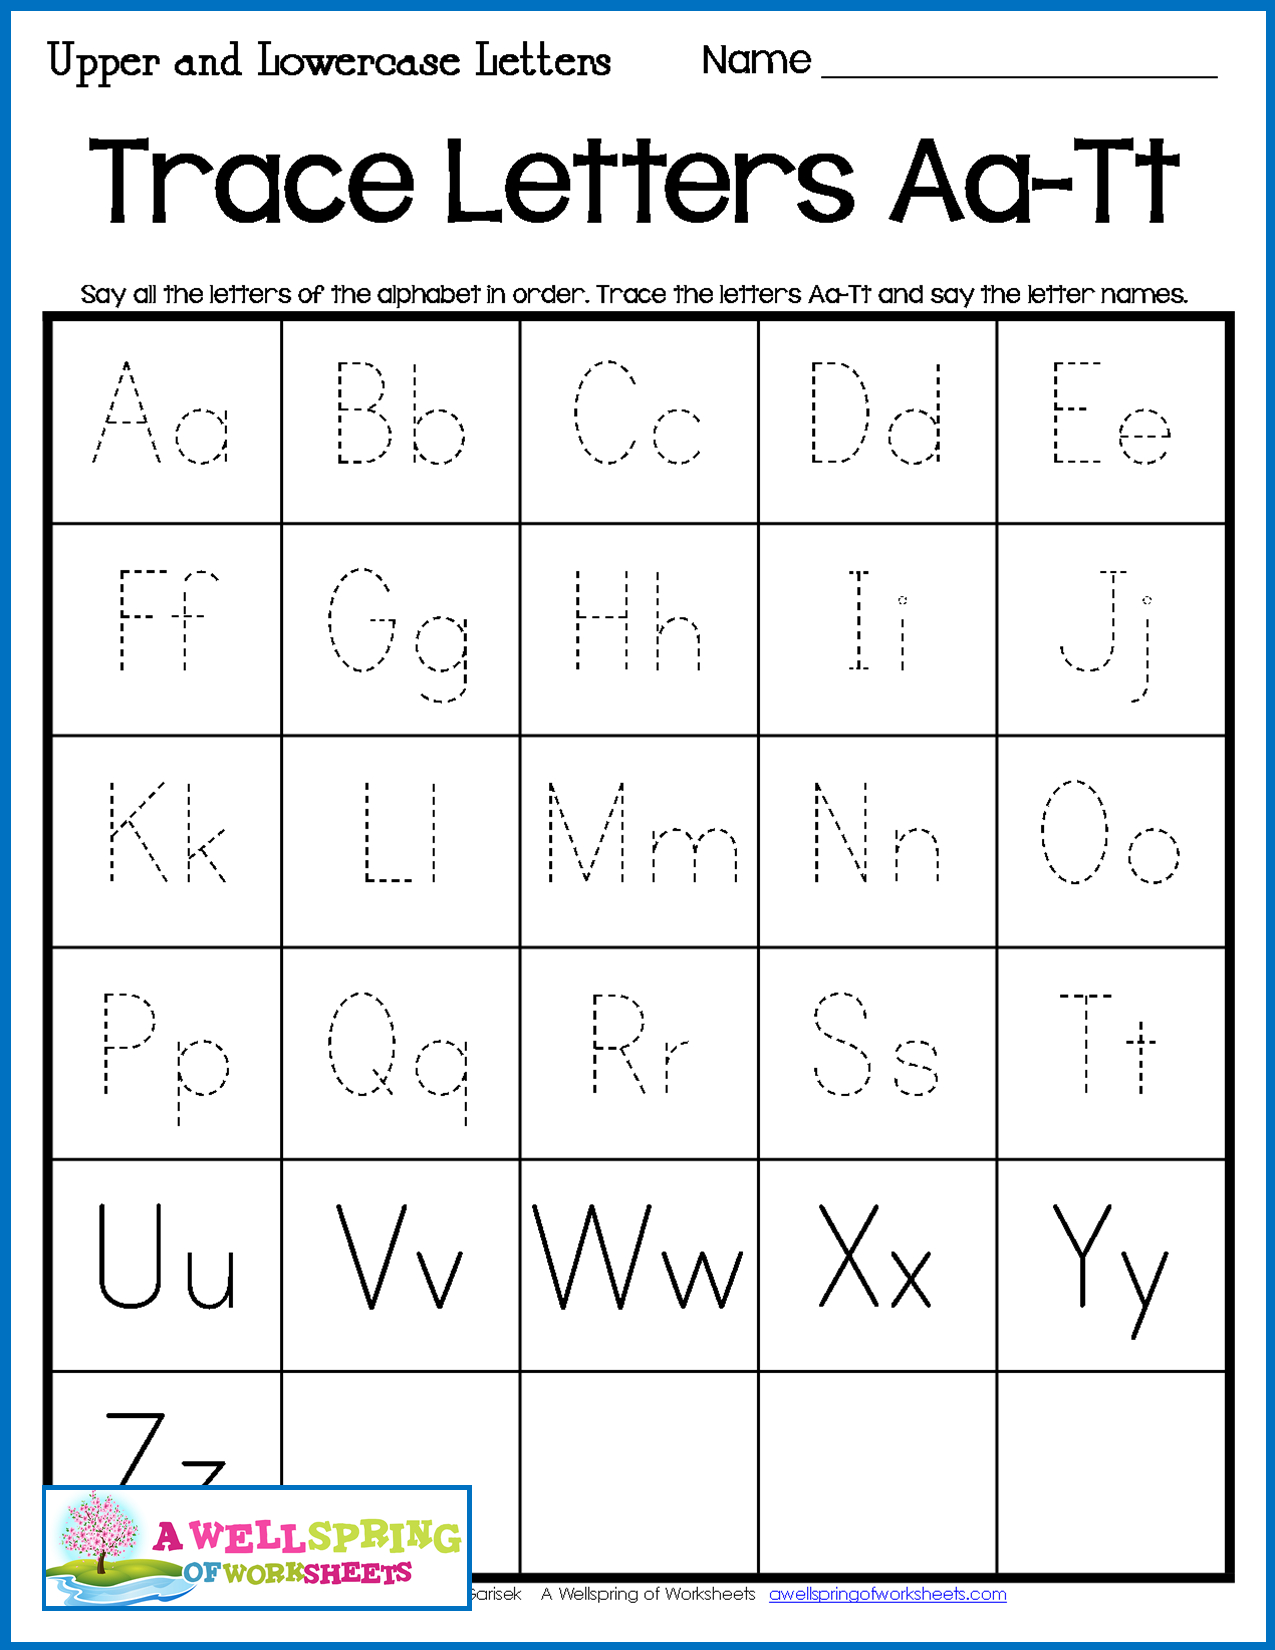 Alphabet Tracing Worksheets - Uppercase &amp;amp; Lowercase Letters intended for Upper And Lowercase Letters Tracing Worksheets